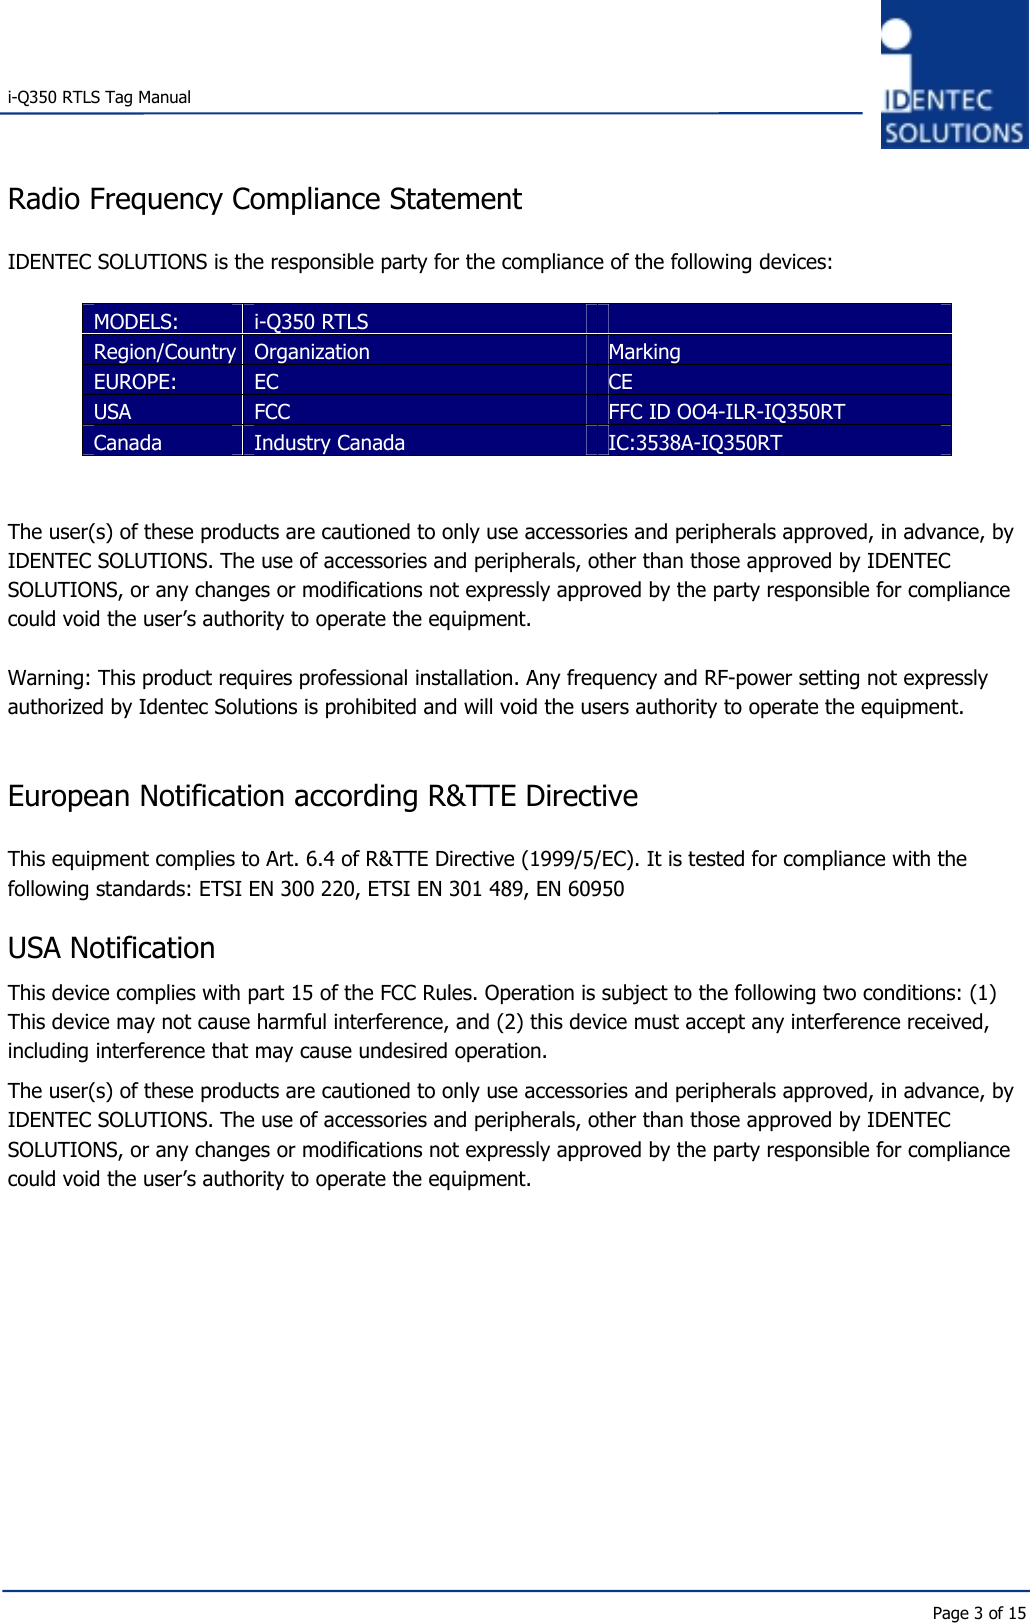   i-Q350 RTLS Tag Manual      Page 3 of 15 Radio Frequency Compliance Statement  IDENTEC SOLUTIONS is the responsible party for the compliance of the following devices:  MODELS:  i-Q350 RTLS   Region/Country Organization  Marking EUROPE:  EC   CE USA  FCC  FFC ID OO4-ILR-IQ350RT Canada  Industry Canada  IC:3538A-IQ350RT   The user(s) of these products are cautioned to only use accessories and peripherals approved, in advance, by IDENTEC SOLUTIONS. The use of accessories and peripherals, other than those approved by IDENTEC SOLUTIONS, or any changes or modifications not expressly approved by the party responsible for compliance could void the user’s authority to operate the equipment.  Warning: This product requires professional installation. Any frequency and RF-power setting not expressly authorized by Identec Solutions is prohibited and will void the users authority to operate the equipment.   European Notification according R&amp;TTE Directive  This equipment complies to Art. 6.4 of R&amp;TTE Directive (1999/5/EC). It is tested for compliance with the following standards: ETSI EN 300 220, ETSI EN 301 489, EN 60950  USA Notification This device complies with part 15 of the FCC Rules. Operation is subject to the following two conditions: (1) This device may not cause harmful interference, and (2) this device must accept any interference received, including interference that may cause undesired operation. The user(s) of these products are cautioned to only use accessories and peripherals approved, in advance, by IDENTEC SOLUTIONS. The use of accessories and peripherals, other than those approved by IDENTEC SOLUTIONS, or any changes or modifications not expressly approved by the party responsible for compliance could void the user’s authority to operate the equipment.     